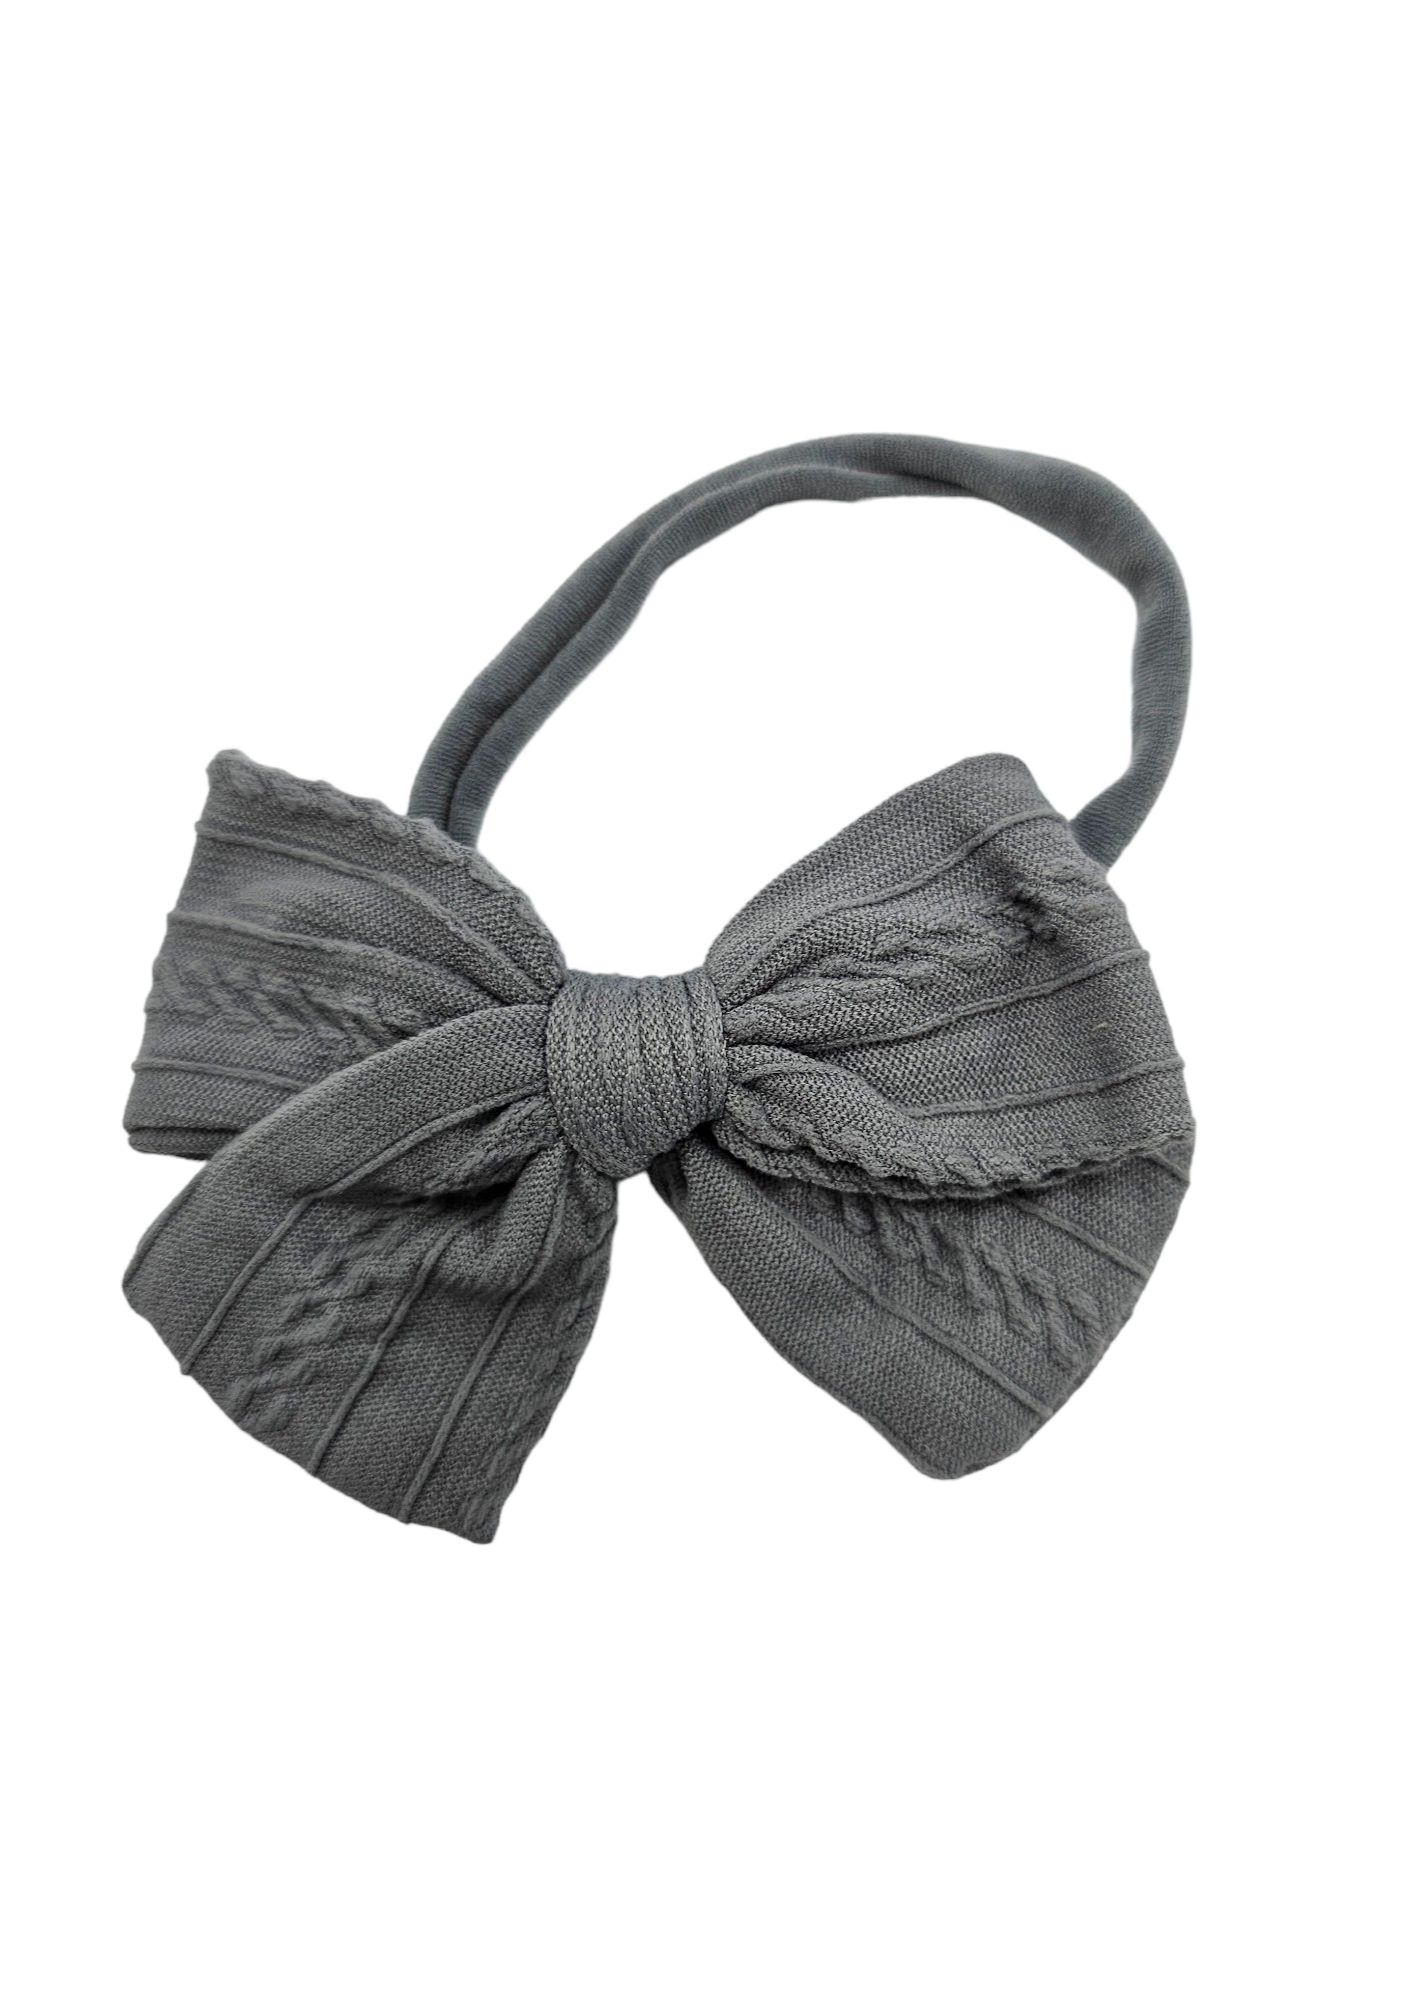 Grey 3.5 Inch Cable Knit Dainty Bow Headband - Betty Brown Boutique Ltd